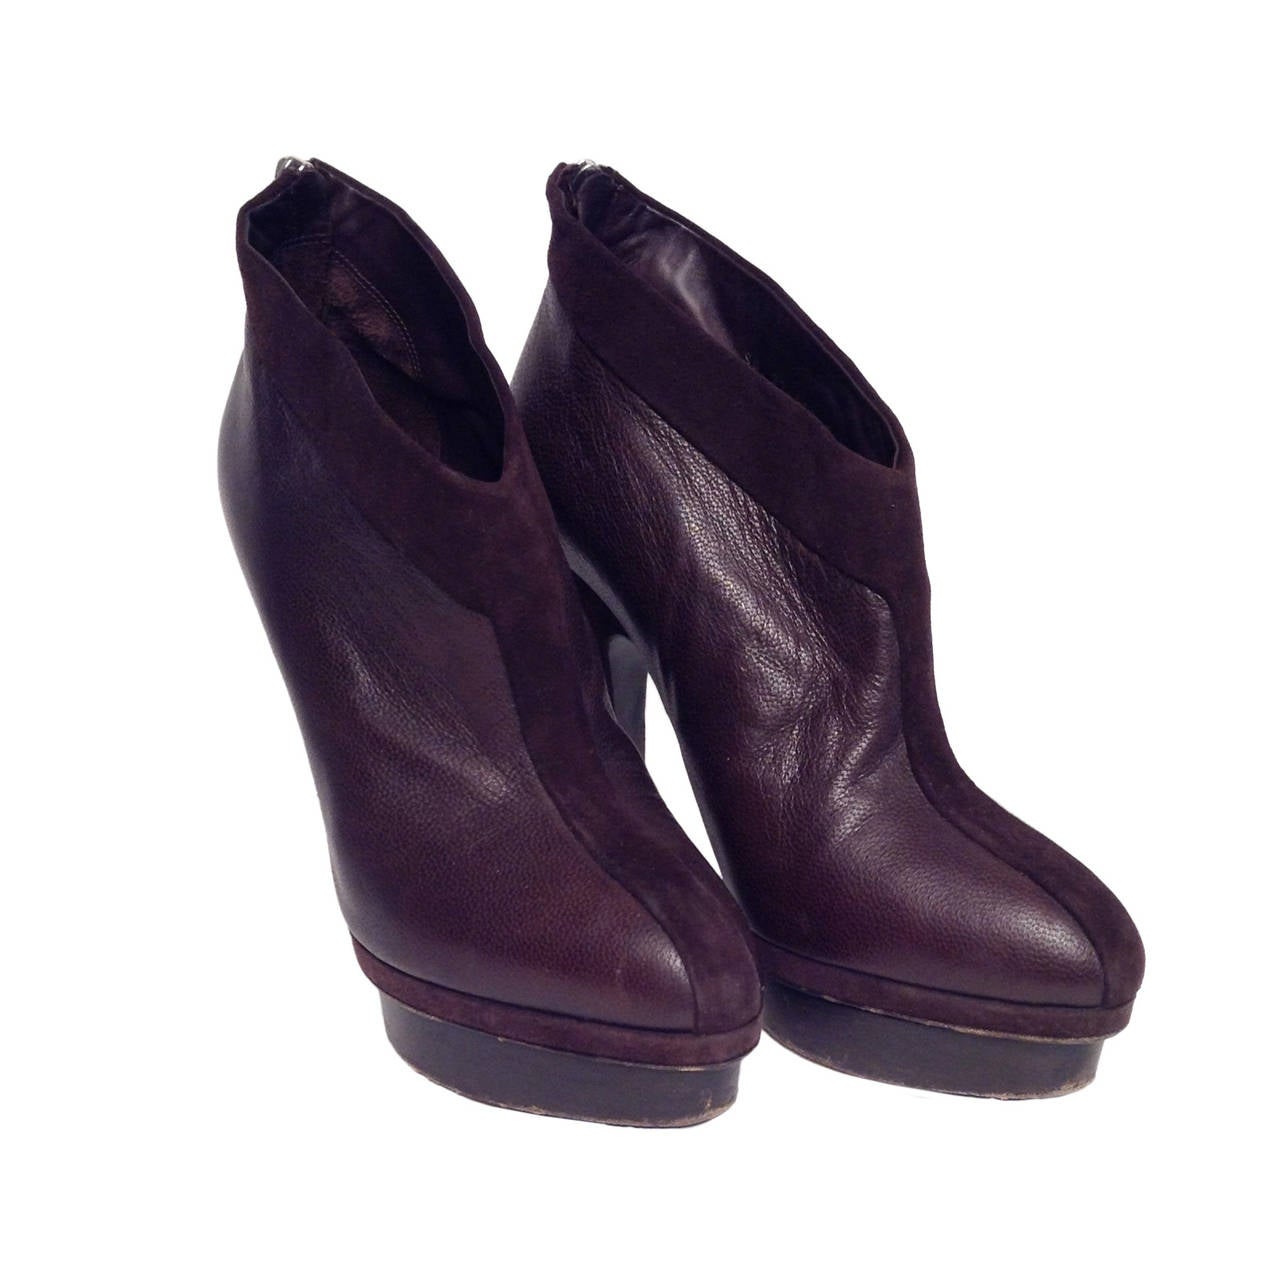 Yves Saint Laurent Brown Leather Booties Size 39.5/9 For Sale